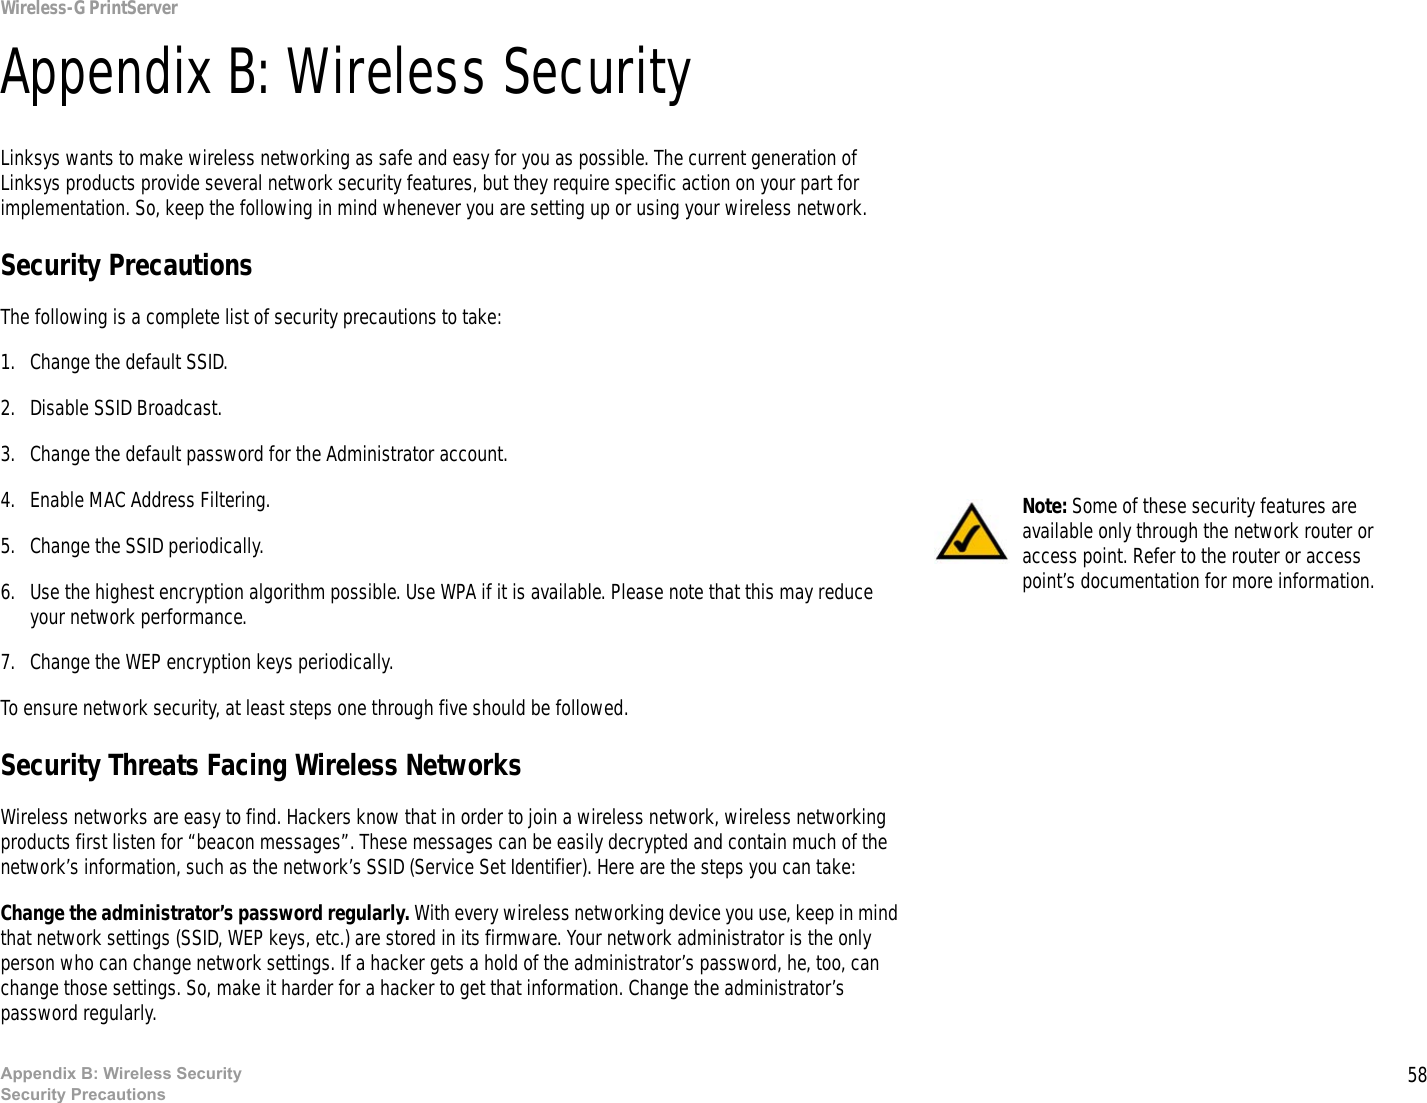 58Appendix B: Wireless SecuritySecurity PrecautionsWireless-G PrintServerAppendix B: Wireless SecurityLinksys wants to make wireless networking as safe and easy for you as possible. The current generation of Linksys products provide several network security features, but they require specific action on your part for implementation. So, keep the following in mind whenever you are setting up or using your wireless network.Security PrecautionsThe following is a complete list of security precautions to take:1. Change the default SSID. 2. Disable SSID Broadcast. 3. Change the default password for the Administrator account. 4. Enable MAC Address Filtering. 5. Change the SSID periodically. 6. Use the highest encryption algorithm possible. Use WPA if it is available. Please note that this may reduce your network performance. 7. Change the WEP encryption keys periodically. To ensure network security, at least steps one through five should be followed.Security Threats Facing Wireless Networks Wireless networks are easy to find. Hackers know that in order to join a wireless network, wireless networking products first listen for “beacon messages”. These messages can be easily decrypted and contain much of the network’s information, such as the network’s SSID (Service Set Identifier). Here are the steps you can take:Change the administrator’s password regularly. With every wireless networking device you use, keep in mind that network settings (SSID, WEP keys, etc.) are stored in its firmware. Your network administrator is the only person who can change network settings. If a hacker gets a hold of the administrator’s password, he, too, can change those settings. So, make it harder for a hacker to get that information. Change the administrator’s password regularly.Note: Some of these security features are available only through the network router or access point. Refer to the router or access point’s documentation for more information.